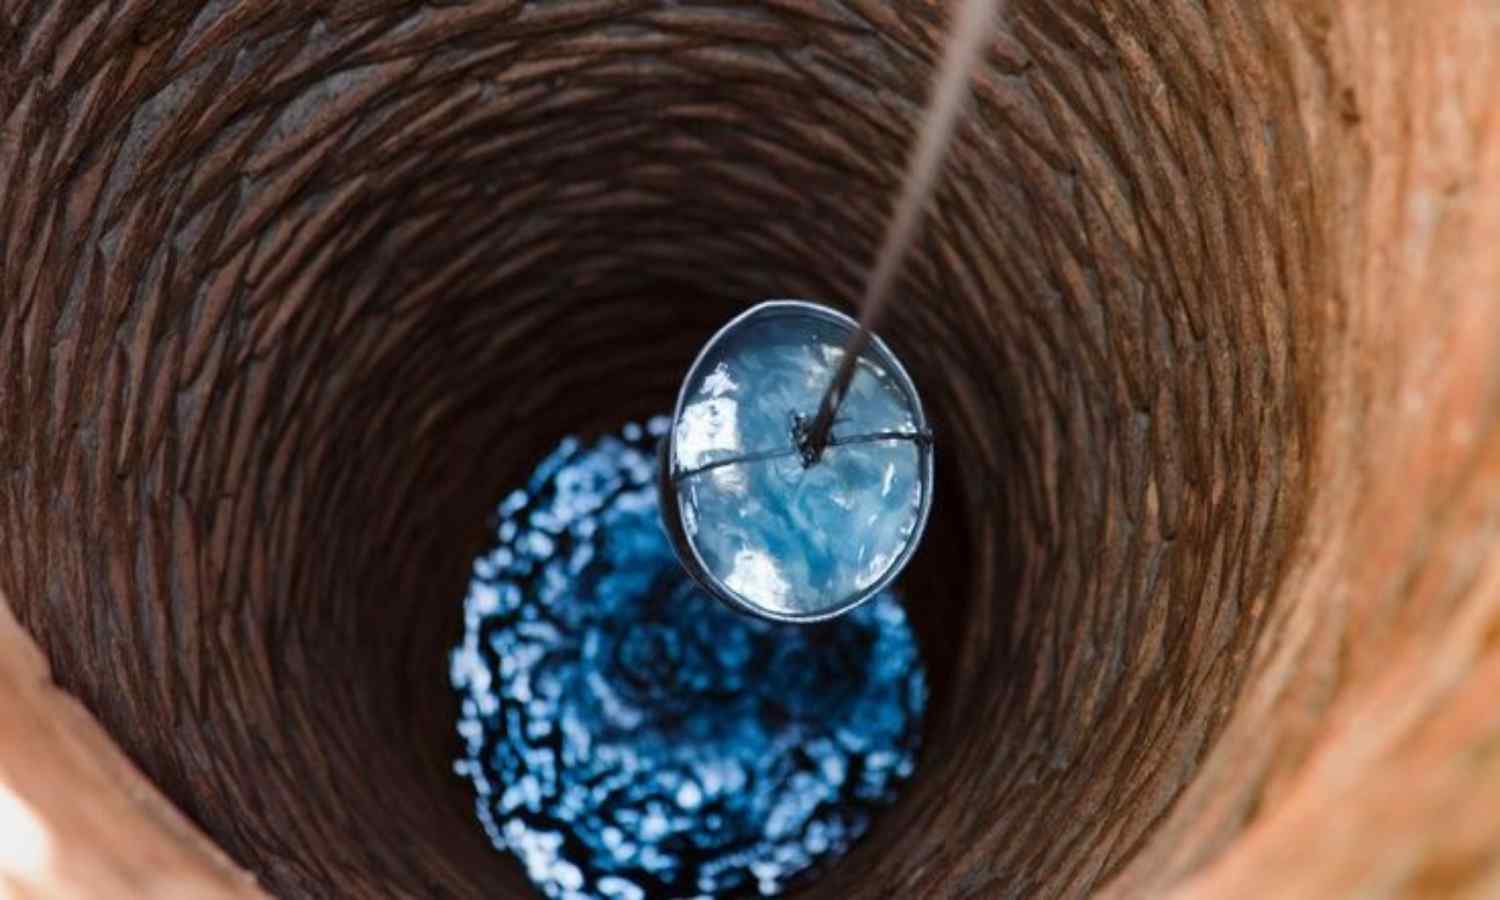 What is the best way to clean well water?